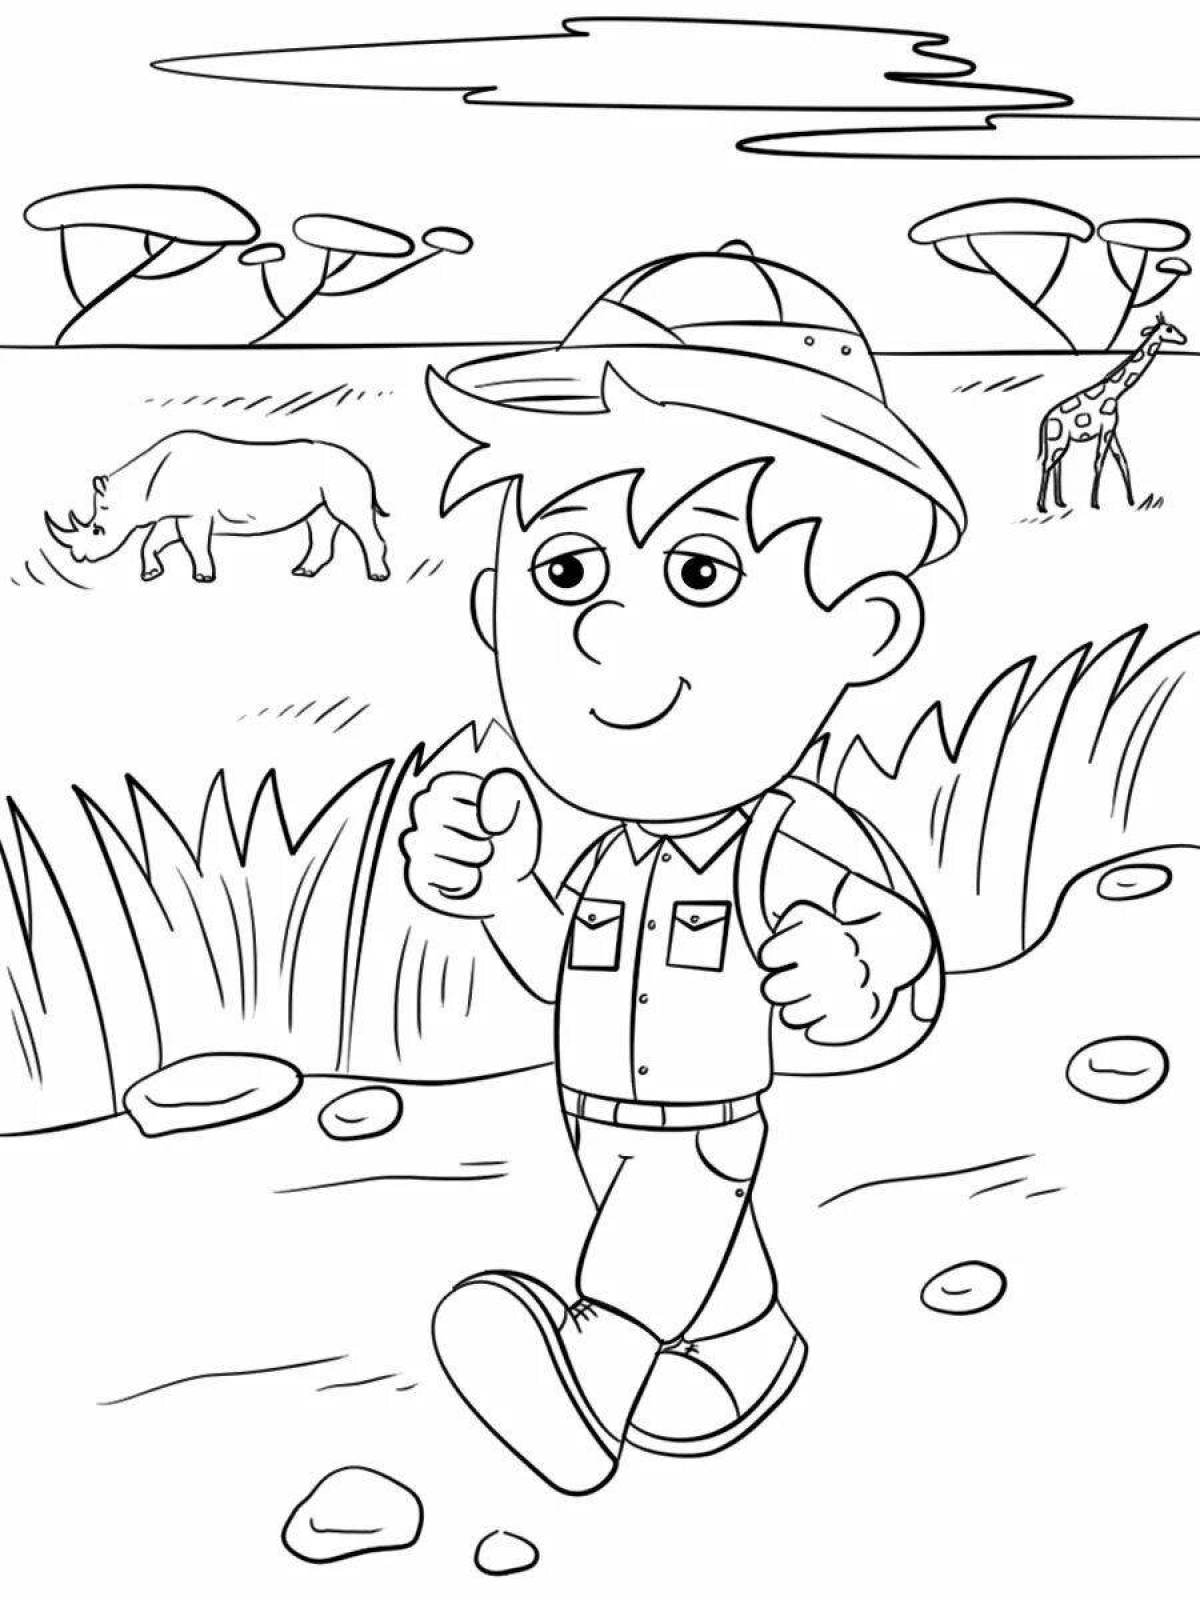 Beautiful travel coloring page for kids